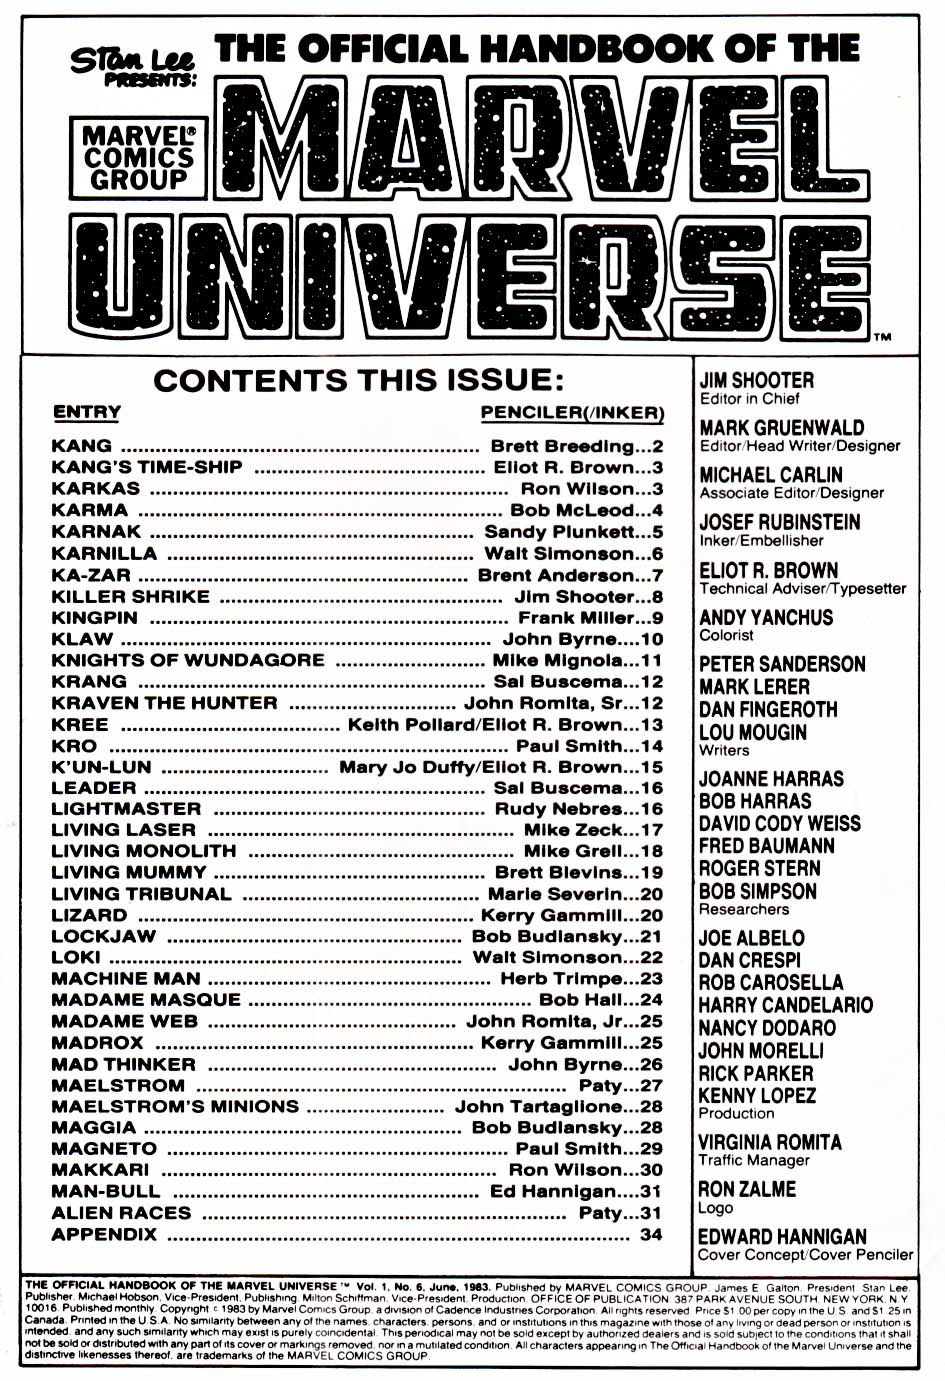 Read online The Official Handbook of the Marvel Universe comic -  Issue #6 - 2